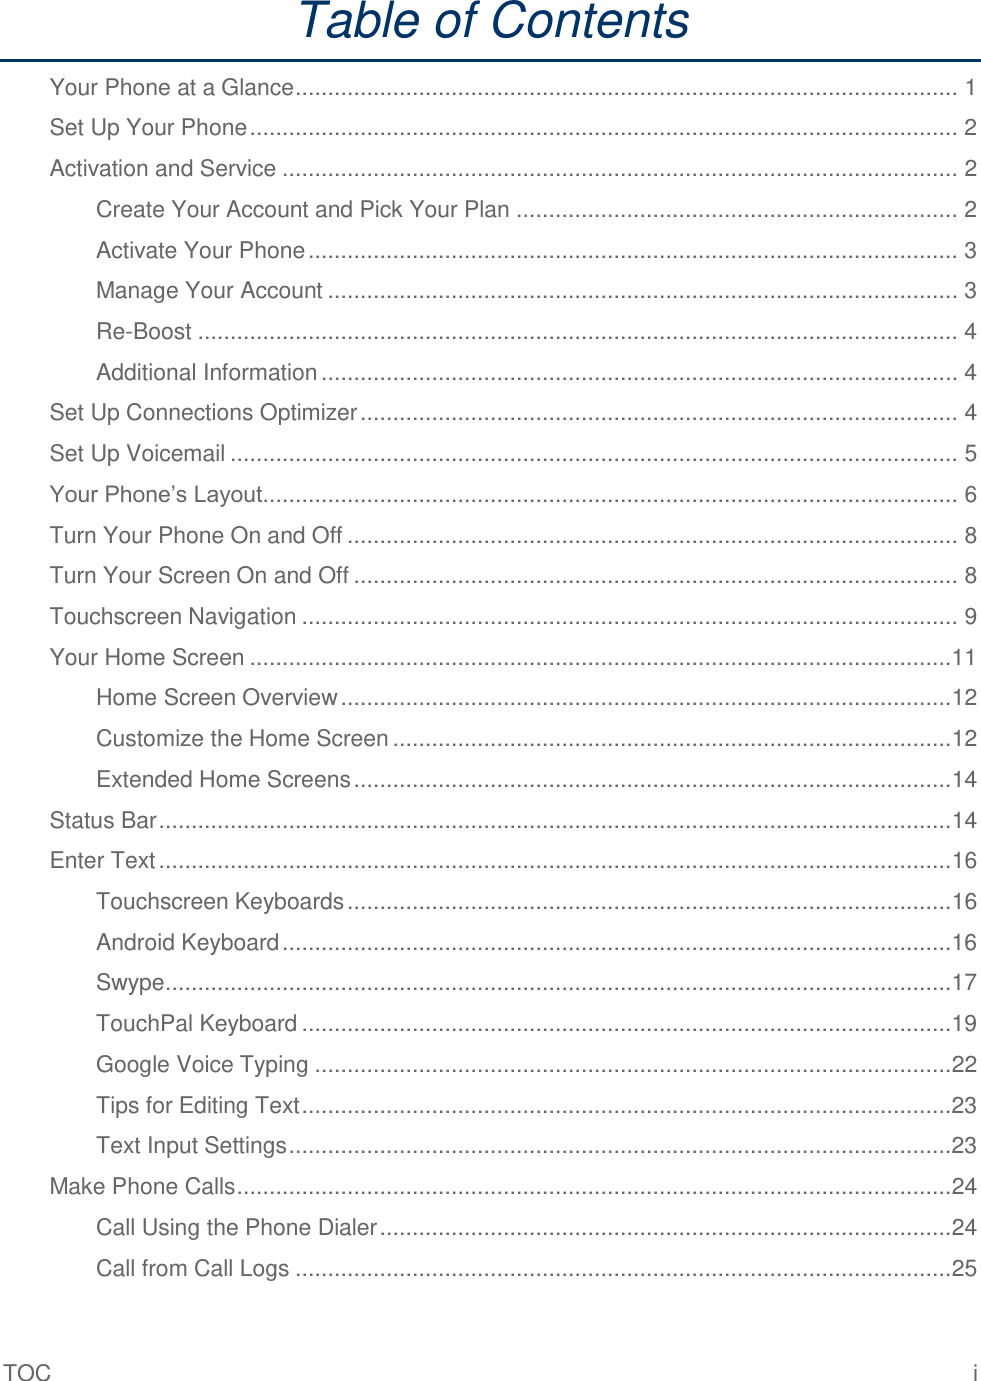 TOC  i Table of Contents Your Phone at a Glance ...................................................................................................... 1 Set Up Your Phone ............................................................................................................. 2 Activation and Service ........................................................................................................ 2 Create Your Account and Pick Your Plan .................................................................... 2 Activate Your Phone .................................................................................................... 3 Manage Your Account ................................................................................................. 3 Re-Boost ..................................................................................................................... 4 Additional Information .................................................................................................. 4 Set Up Connections Optimizer ............................................................................................ 4 Set Up Voicemail ................................................................................................................ 5 Your Phone’s Layout ........................................................................................................... 6 Turn Your Phone On and Off .............................................................................................. 8 Turn Your Screen On and Off ............................................................................................. 8 Touchscreen Navigation ..................................................................................................... 9 Your Home Screen ............................................................................................................11 Home Screen Overview ..............................................................................................12 Customize the Home Screen ......................................................................................12 Extended Home Screens ............................................................................................14 Status Bar ..........................................................................................................................14 Enter Text ..........................................................................................................................16 Touchscreen Keyboards .............................................................................................16 Android Keyboard .......................................................................................................16 Swype .........................................................................................................................17 TouchPal Keyboard ....................................................................................................19 Google Voice Typing ..................................................................................................22 Tips for Editing Text ....................................................................................................23 Text Input Settings ......................................................................................................23 Make Phone Calls ..............................................................................................................24 Call Using the Phone Dialer ........................................................................................24 Call from Call Logs .....................................................................................................25 